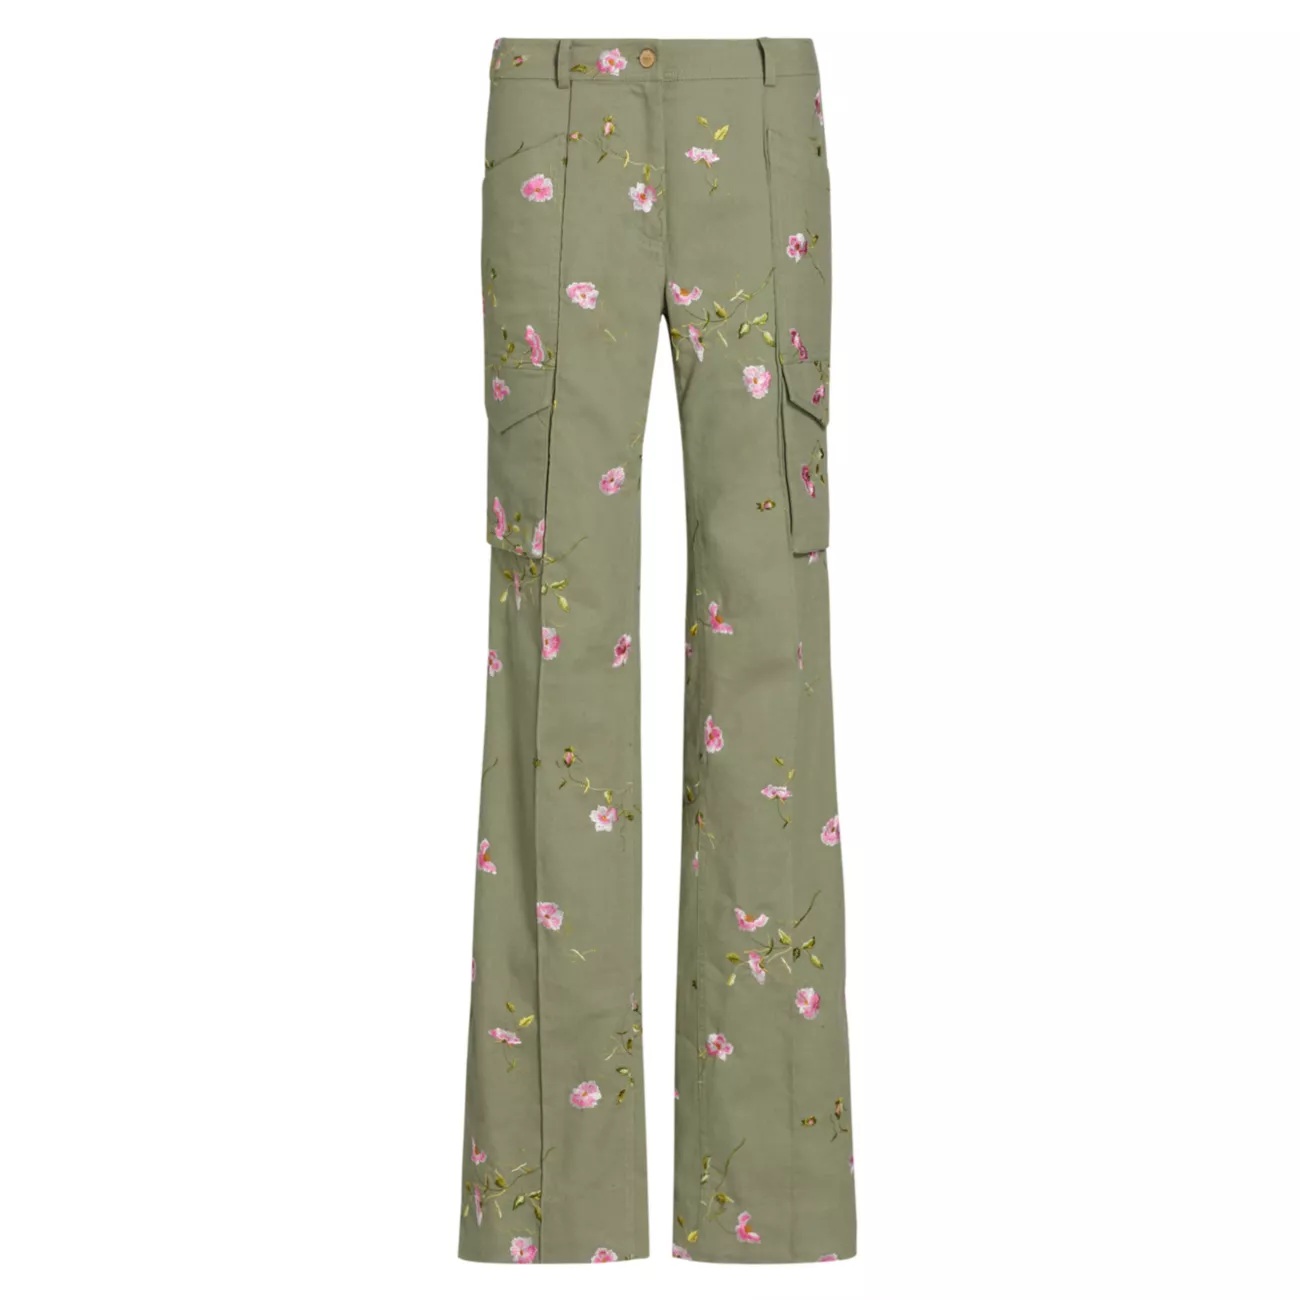 Atworth Embroidered Floral Cargo Pants LOVESHACKFANCY